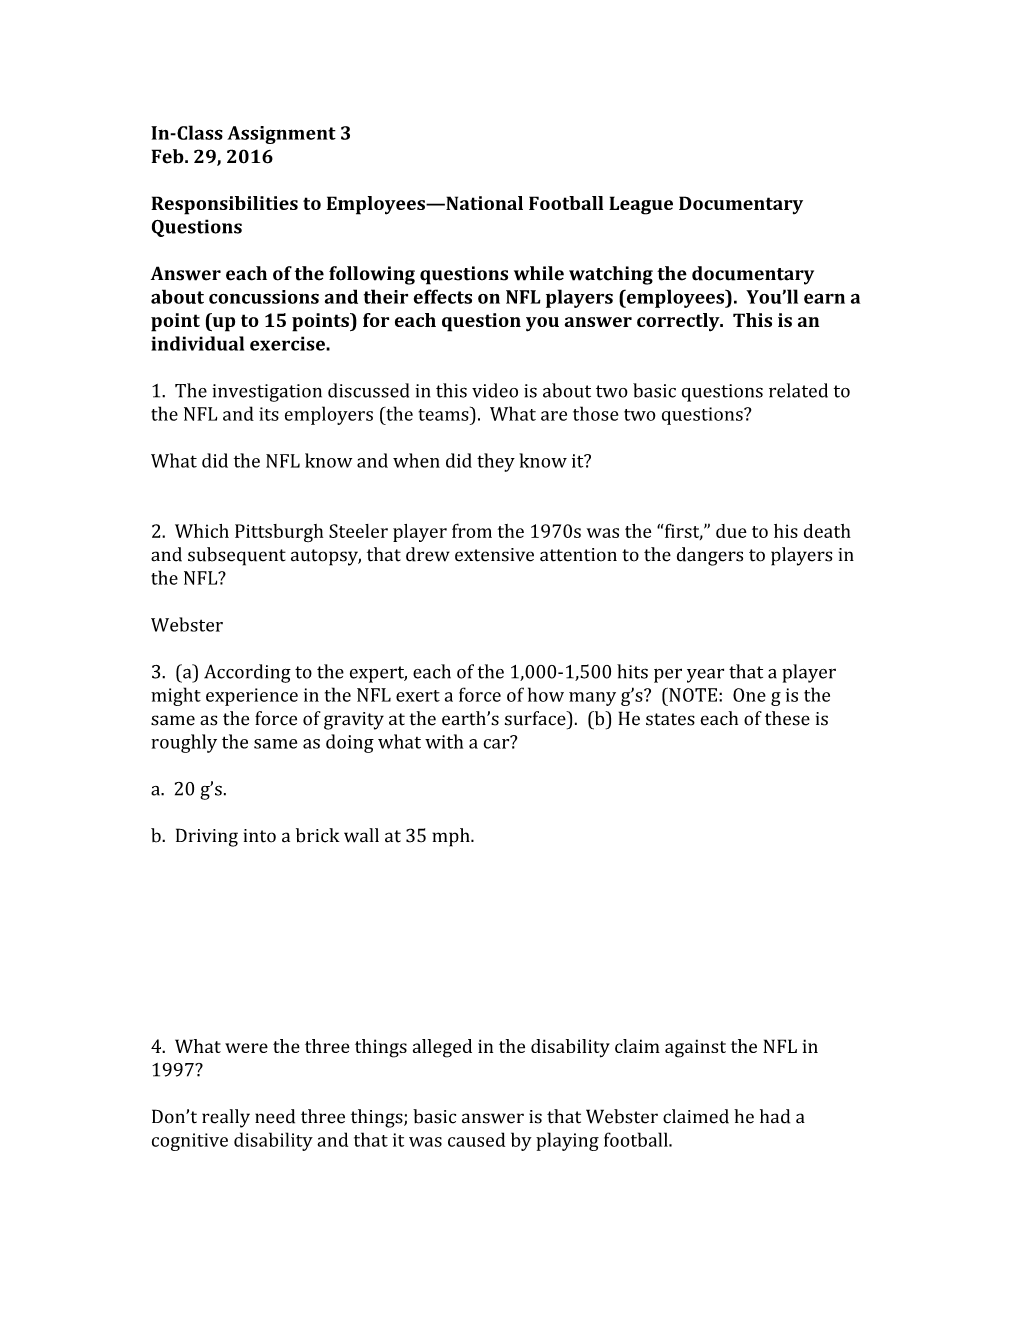 Responsibilities to Employees National Football League Documentary Questions